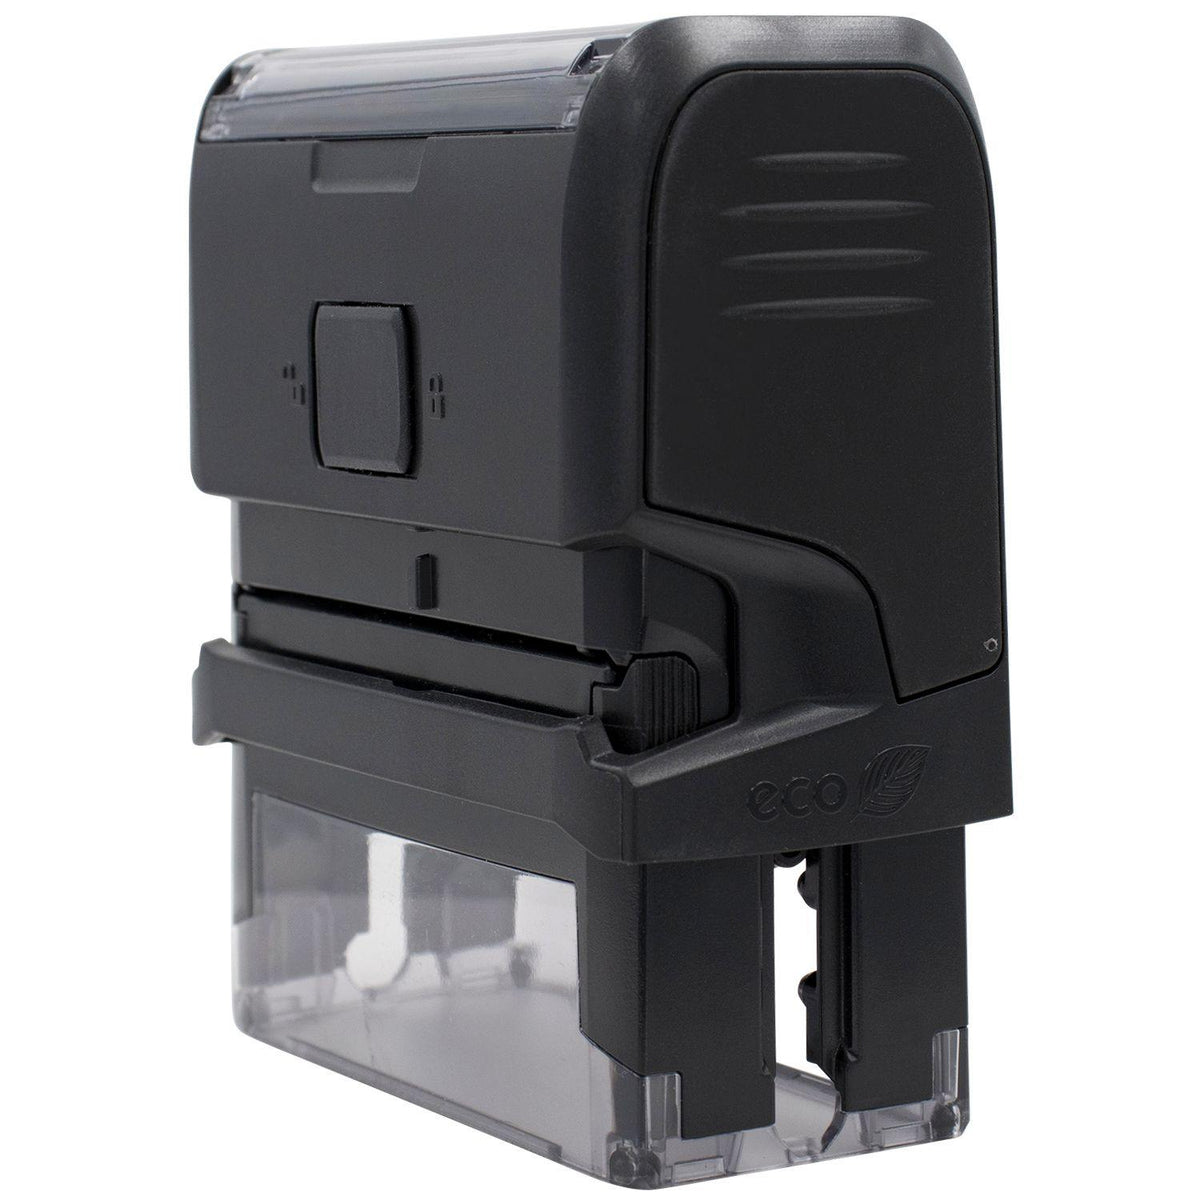 Self Inking Amazing Stamp - Engineer Seal Stamps - Brand_Trodat, Impression Size_Small, Stamp Type_Self-Inking Stamp, Type of Use_Teacher